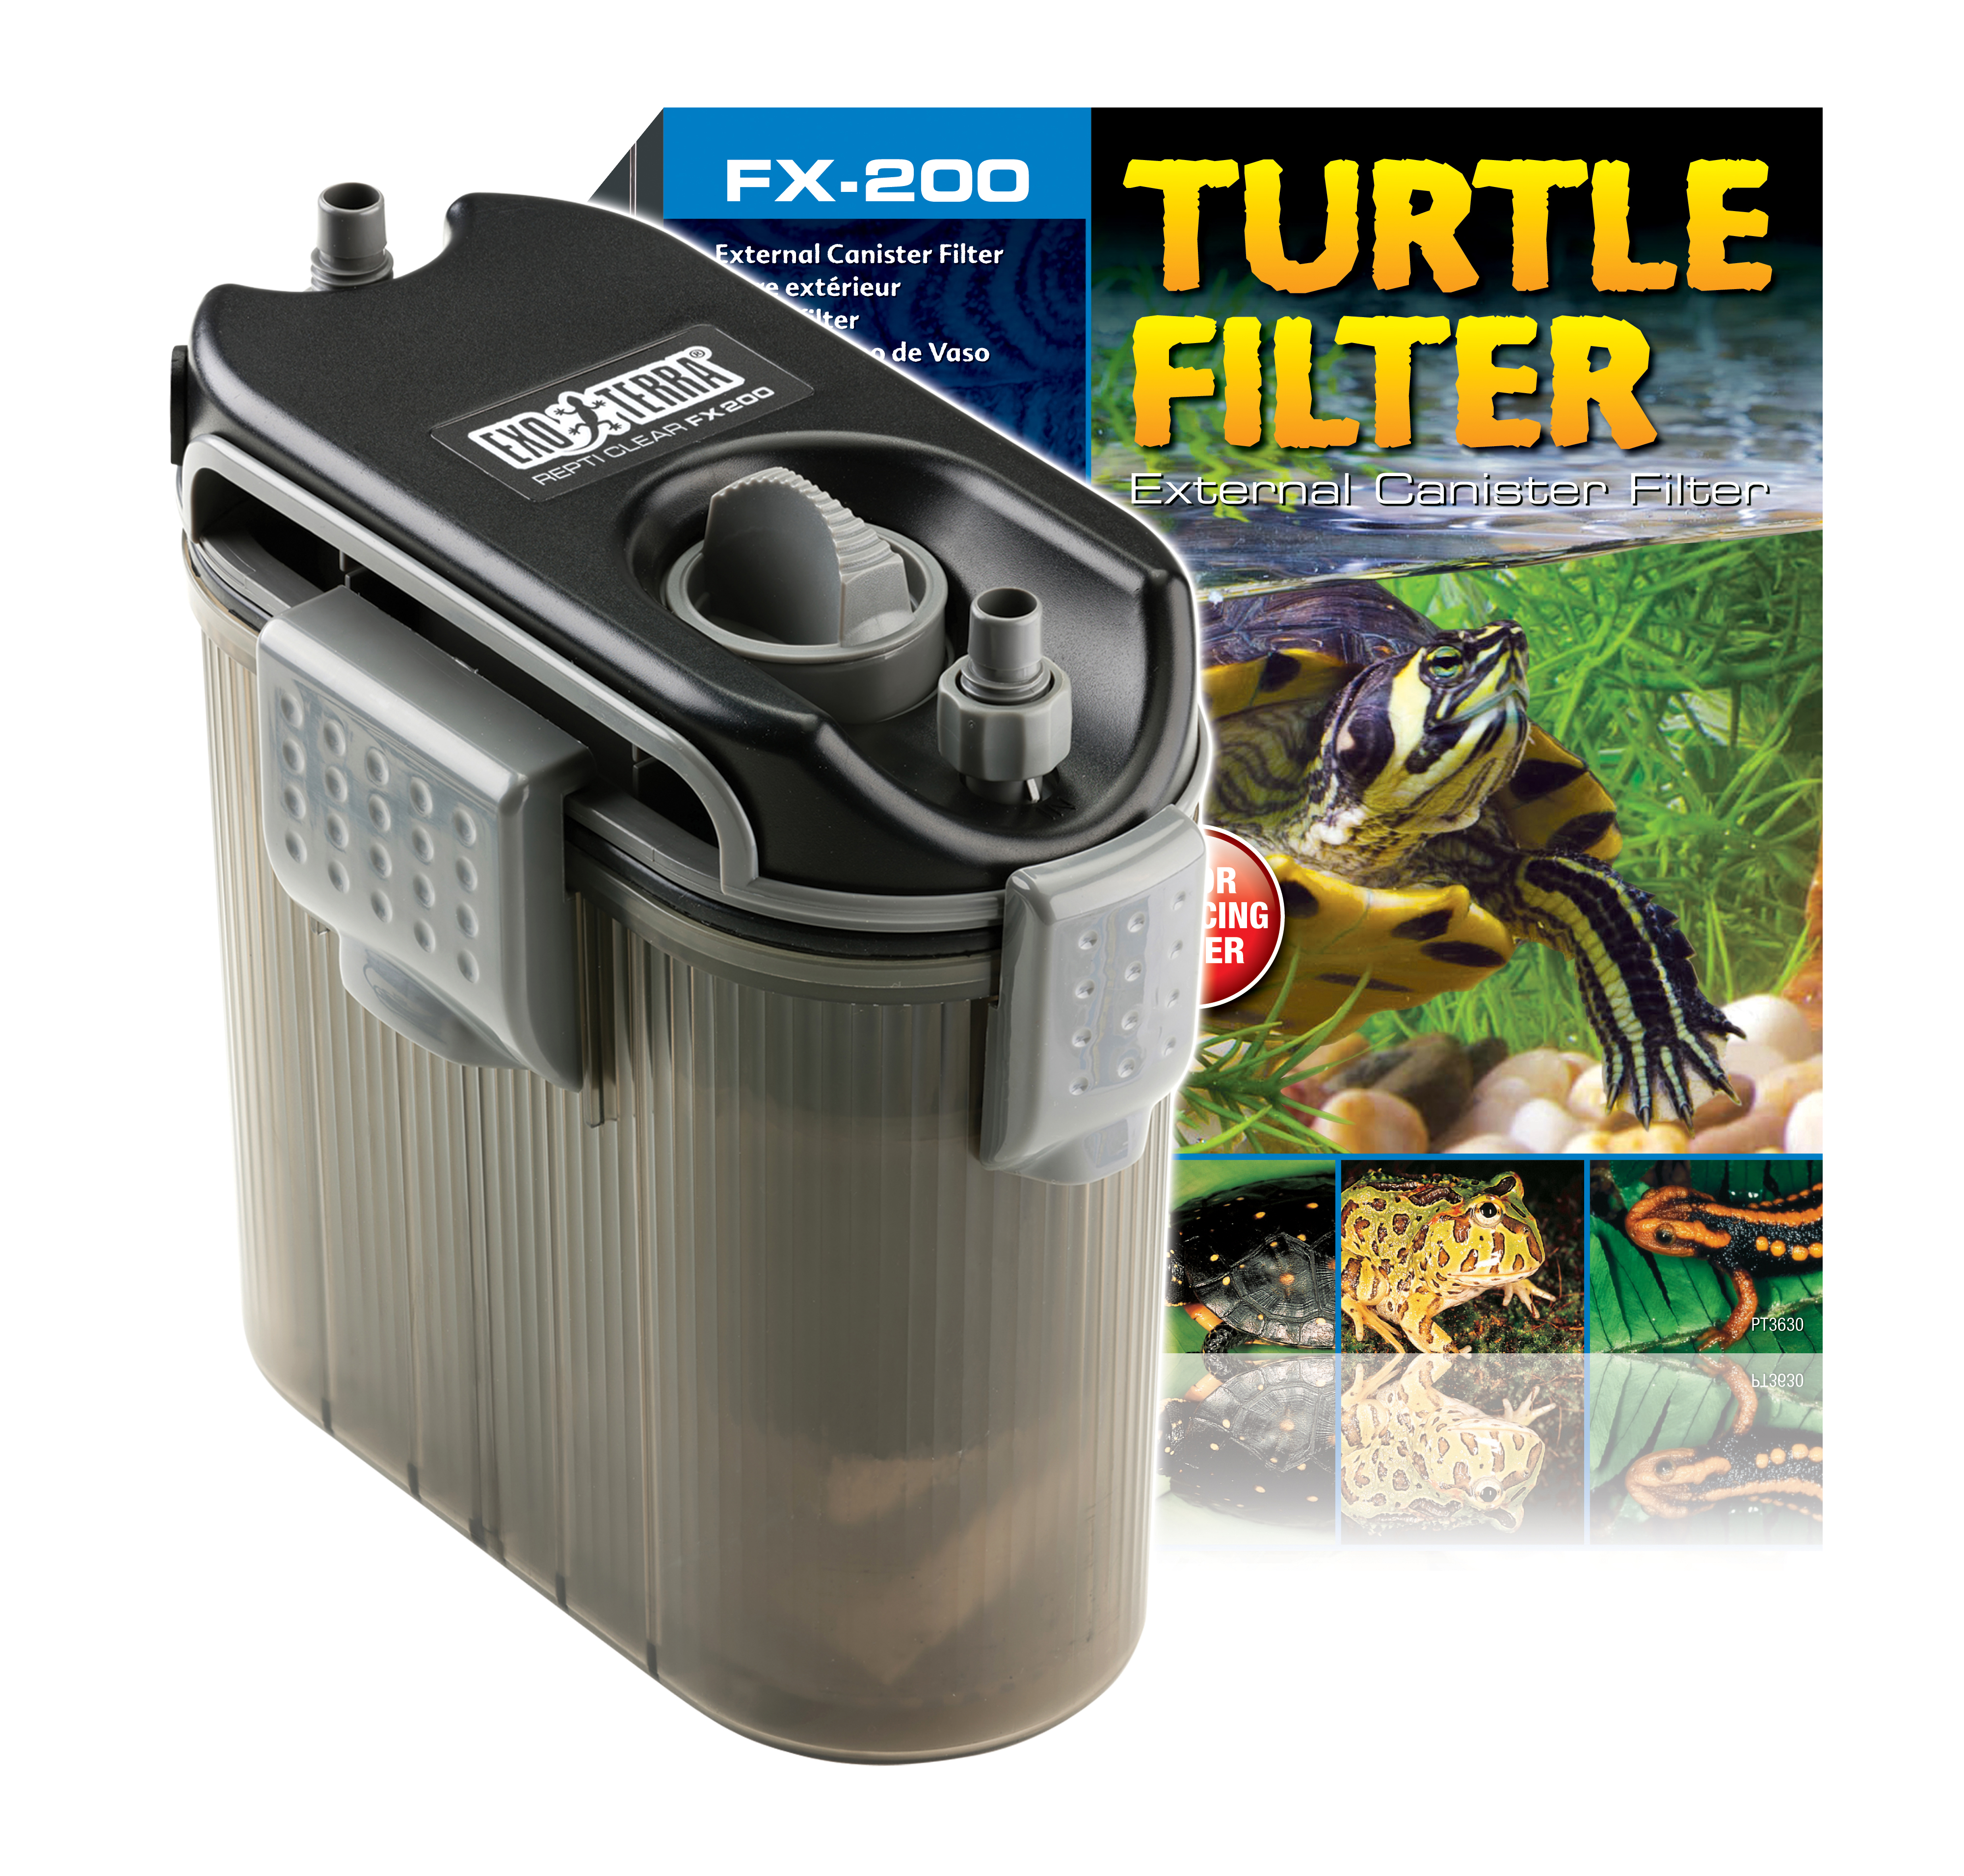 Ex turtle filter fx-200 - Product shot